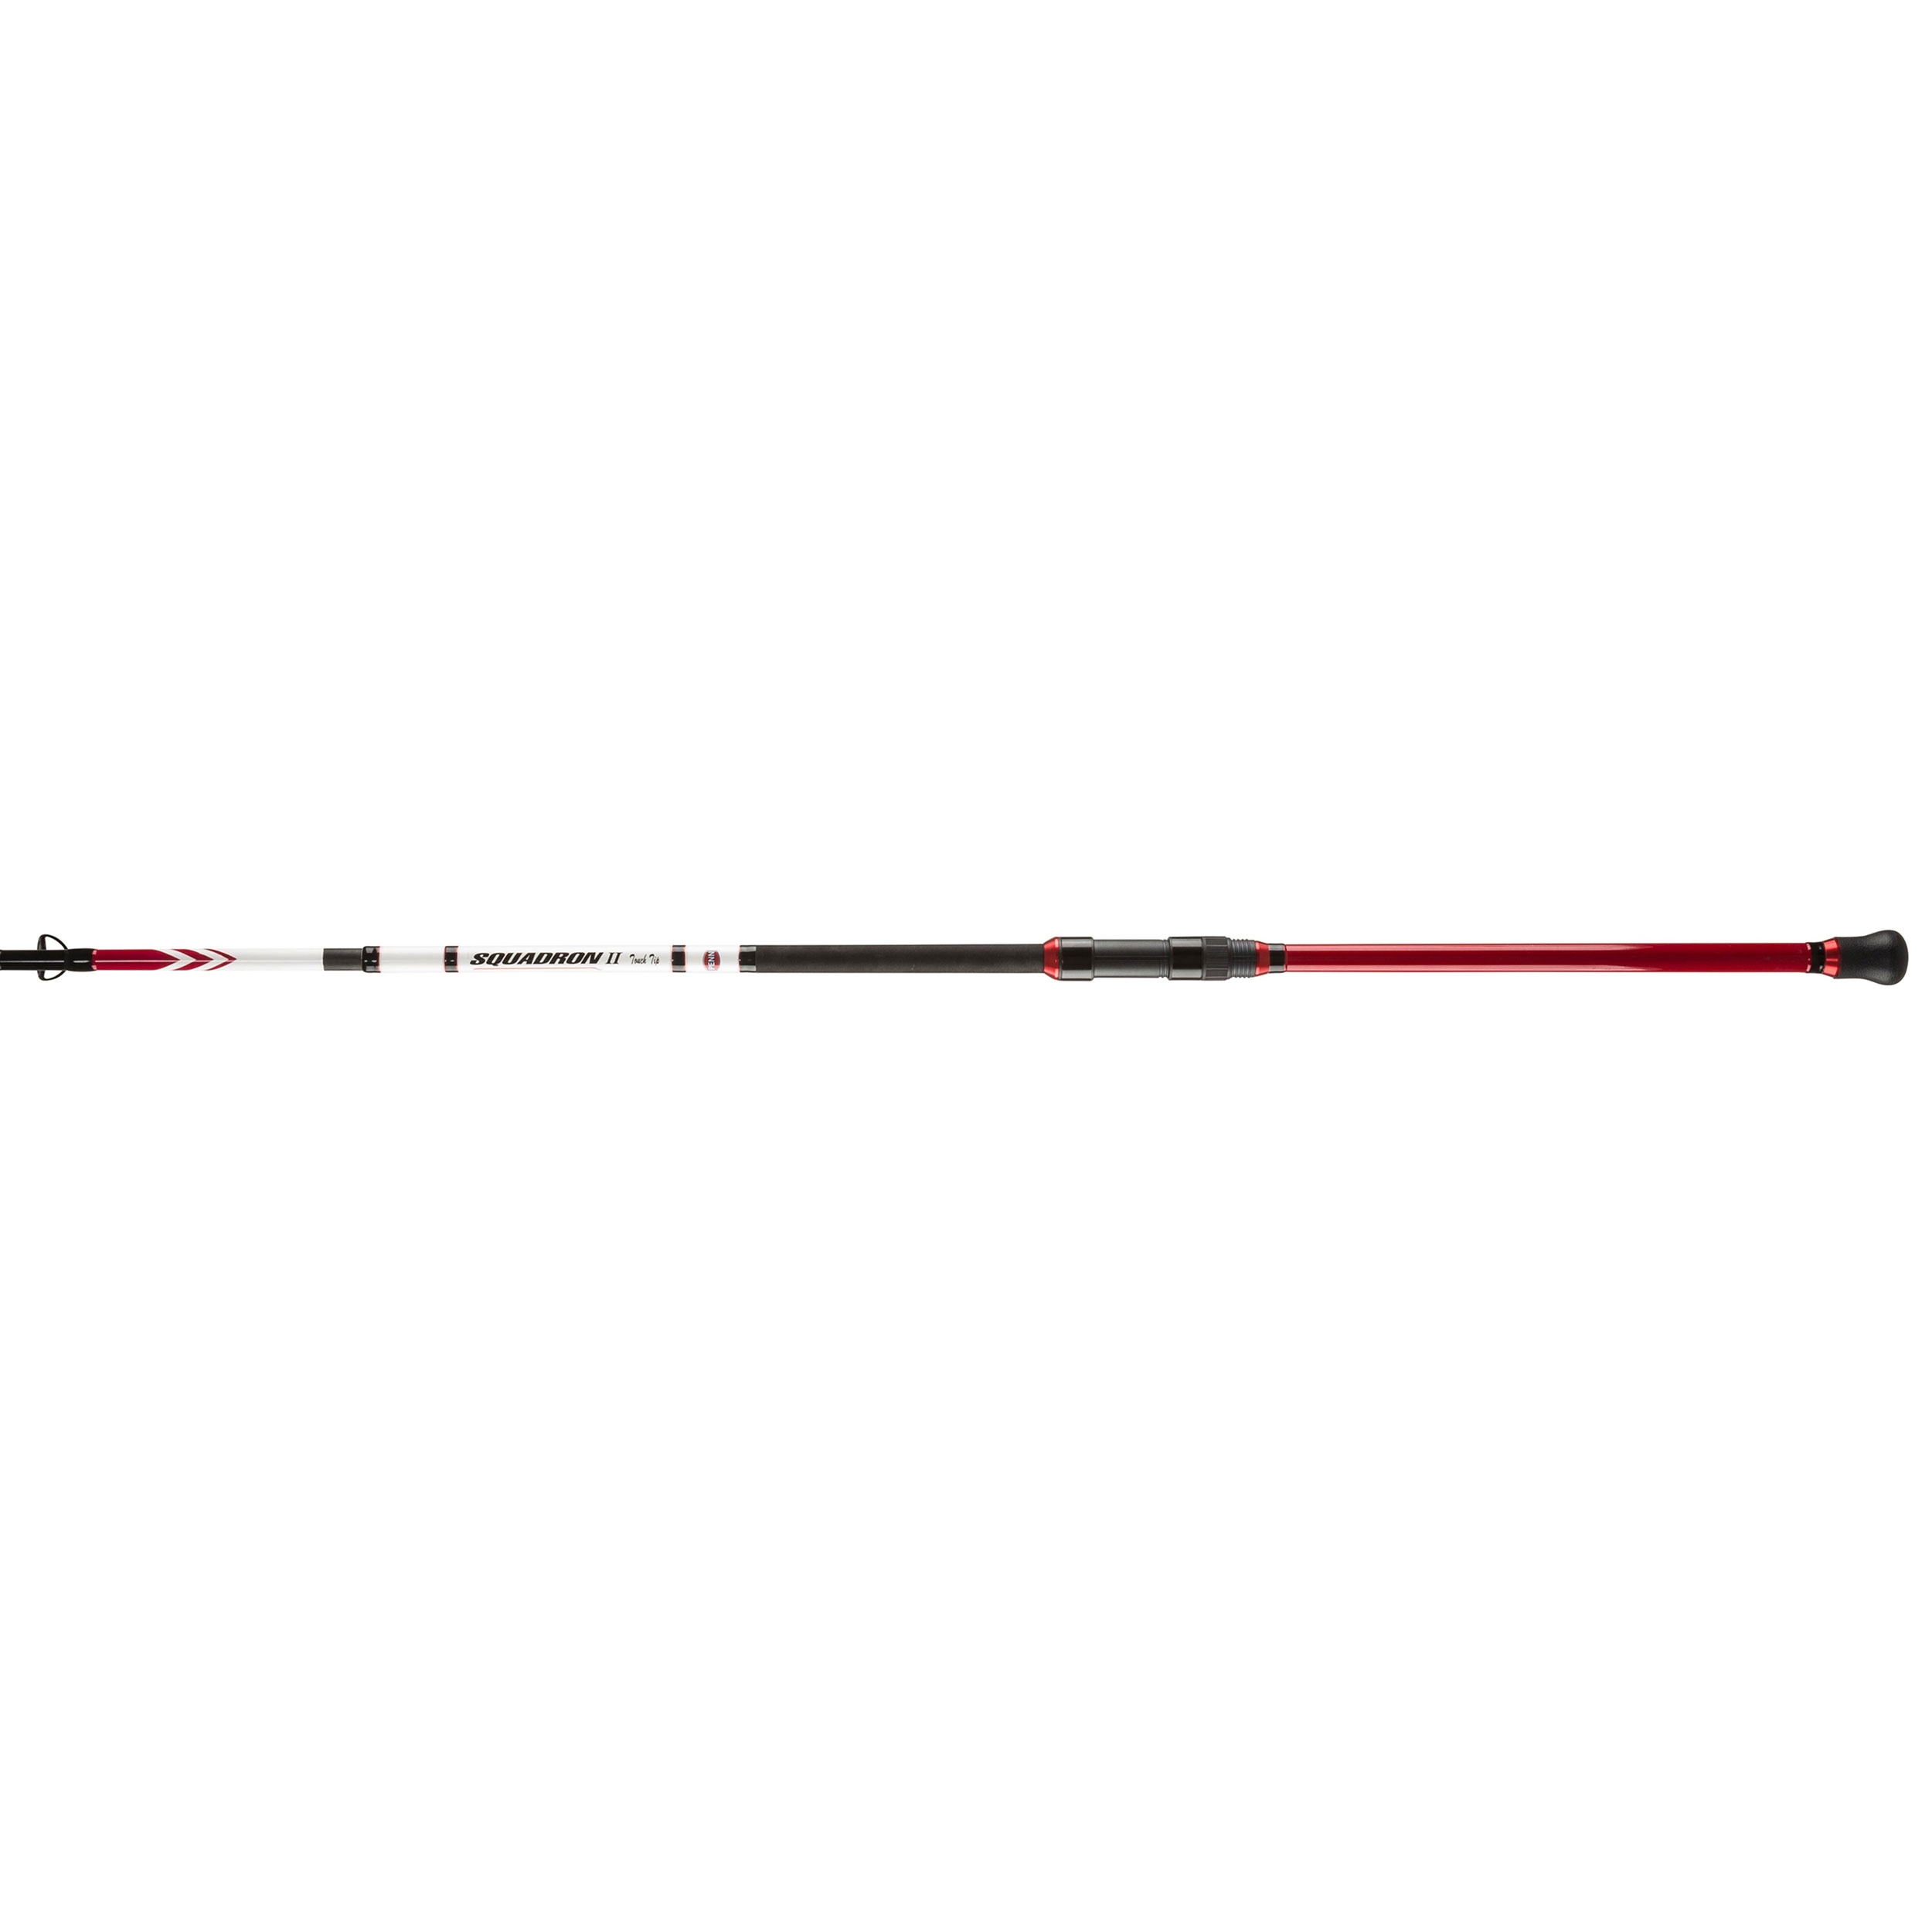 Penn Squadron II Touch Tip Rod - Fishing Sea Boat Rods